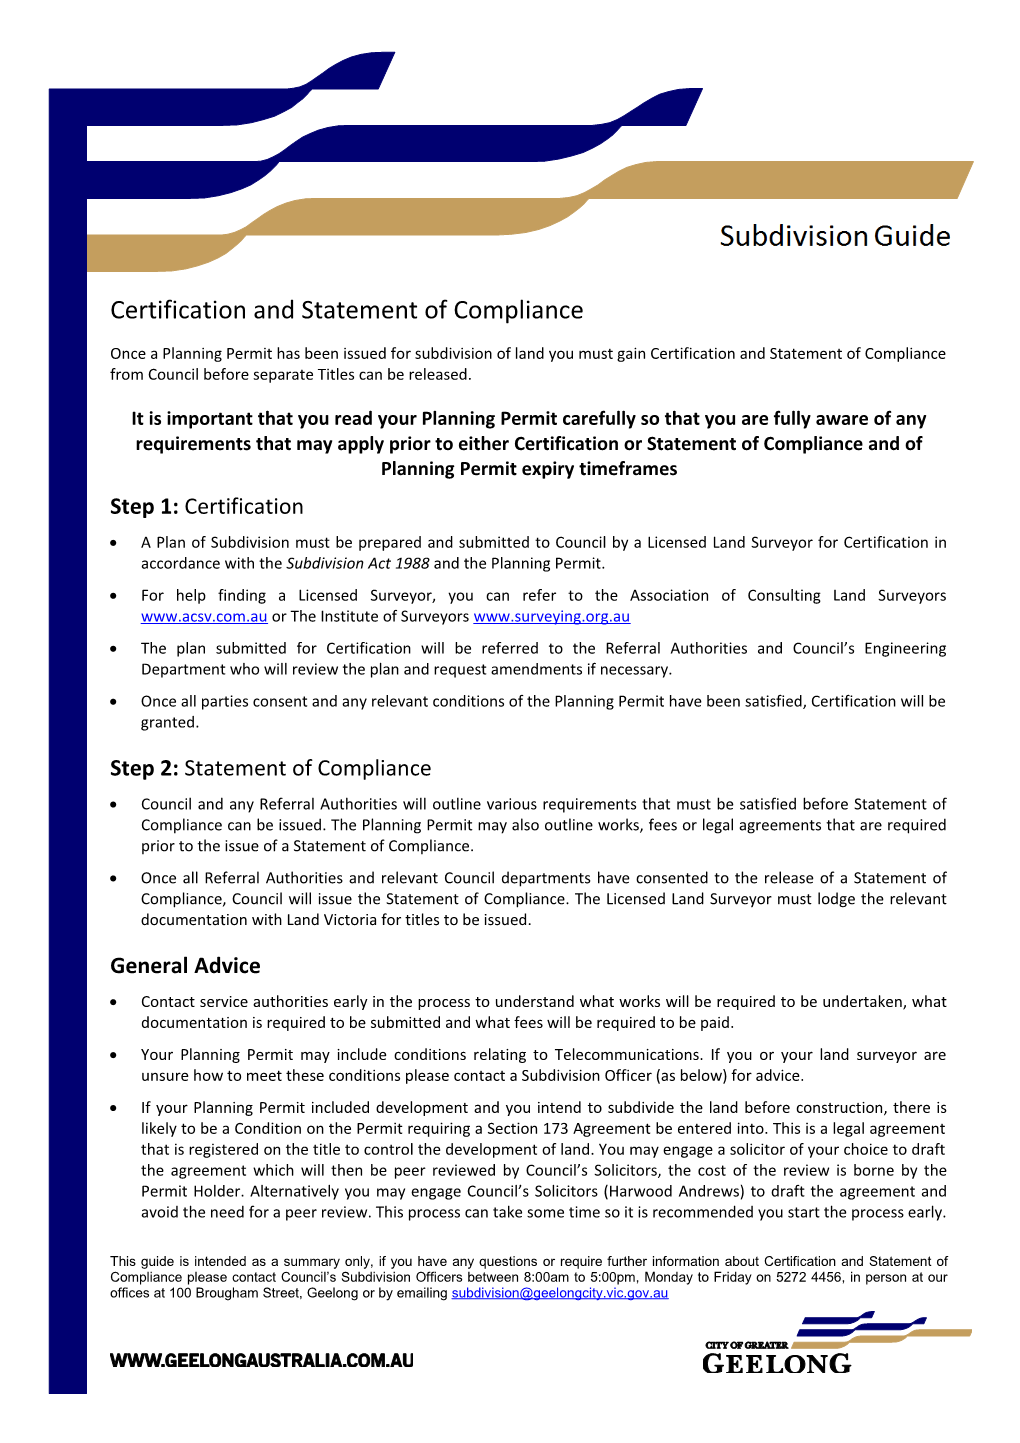 Certification and Statement of Compliance